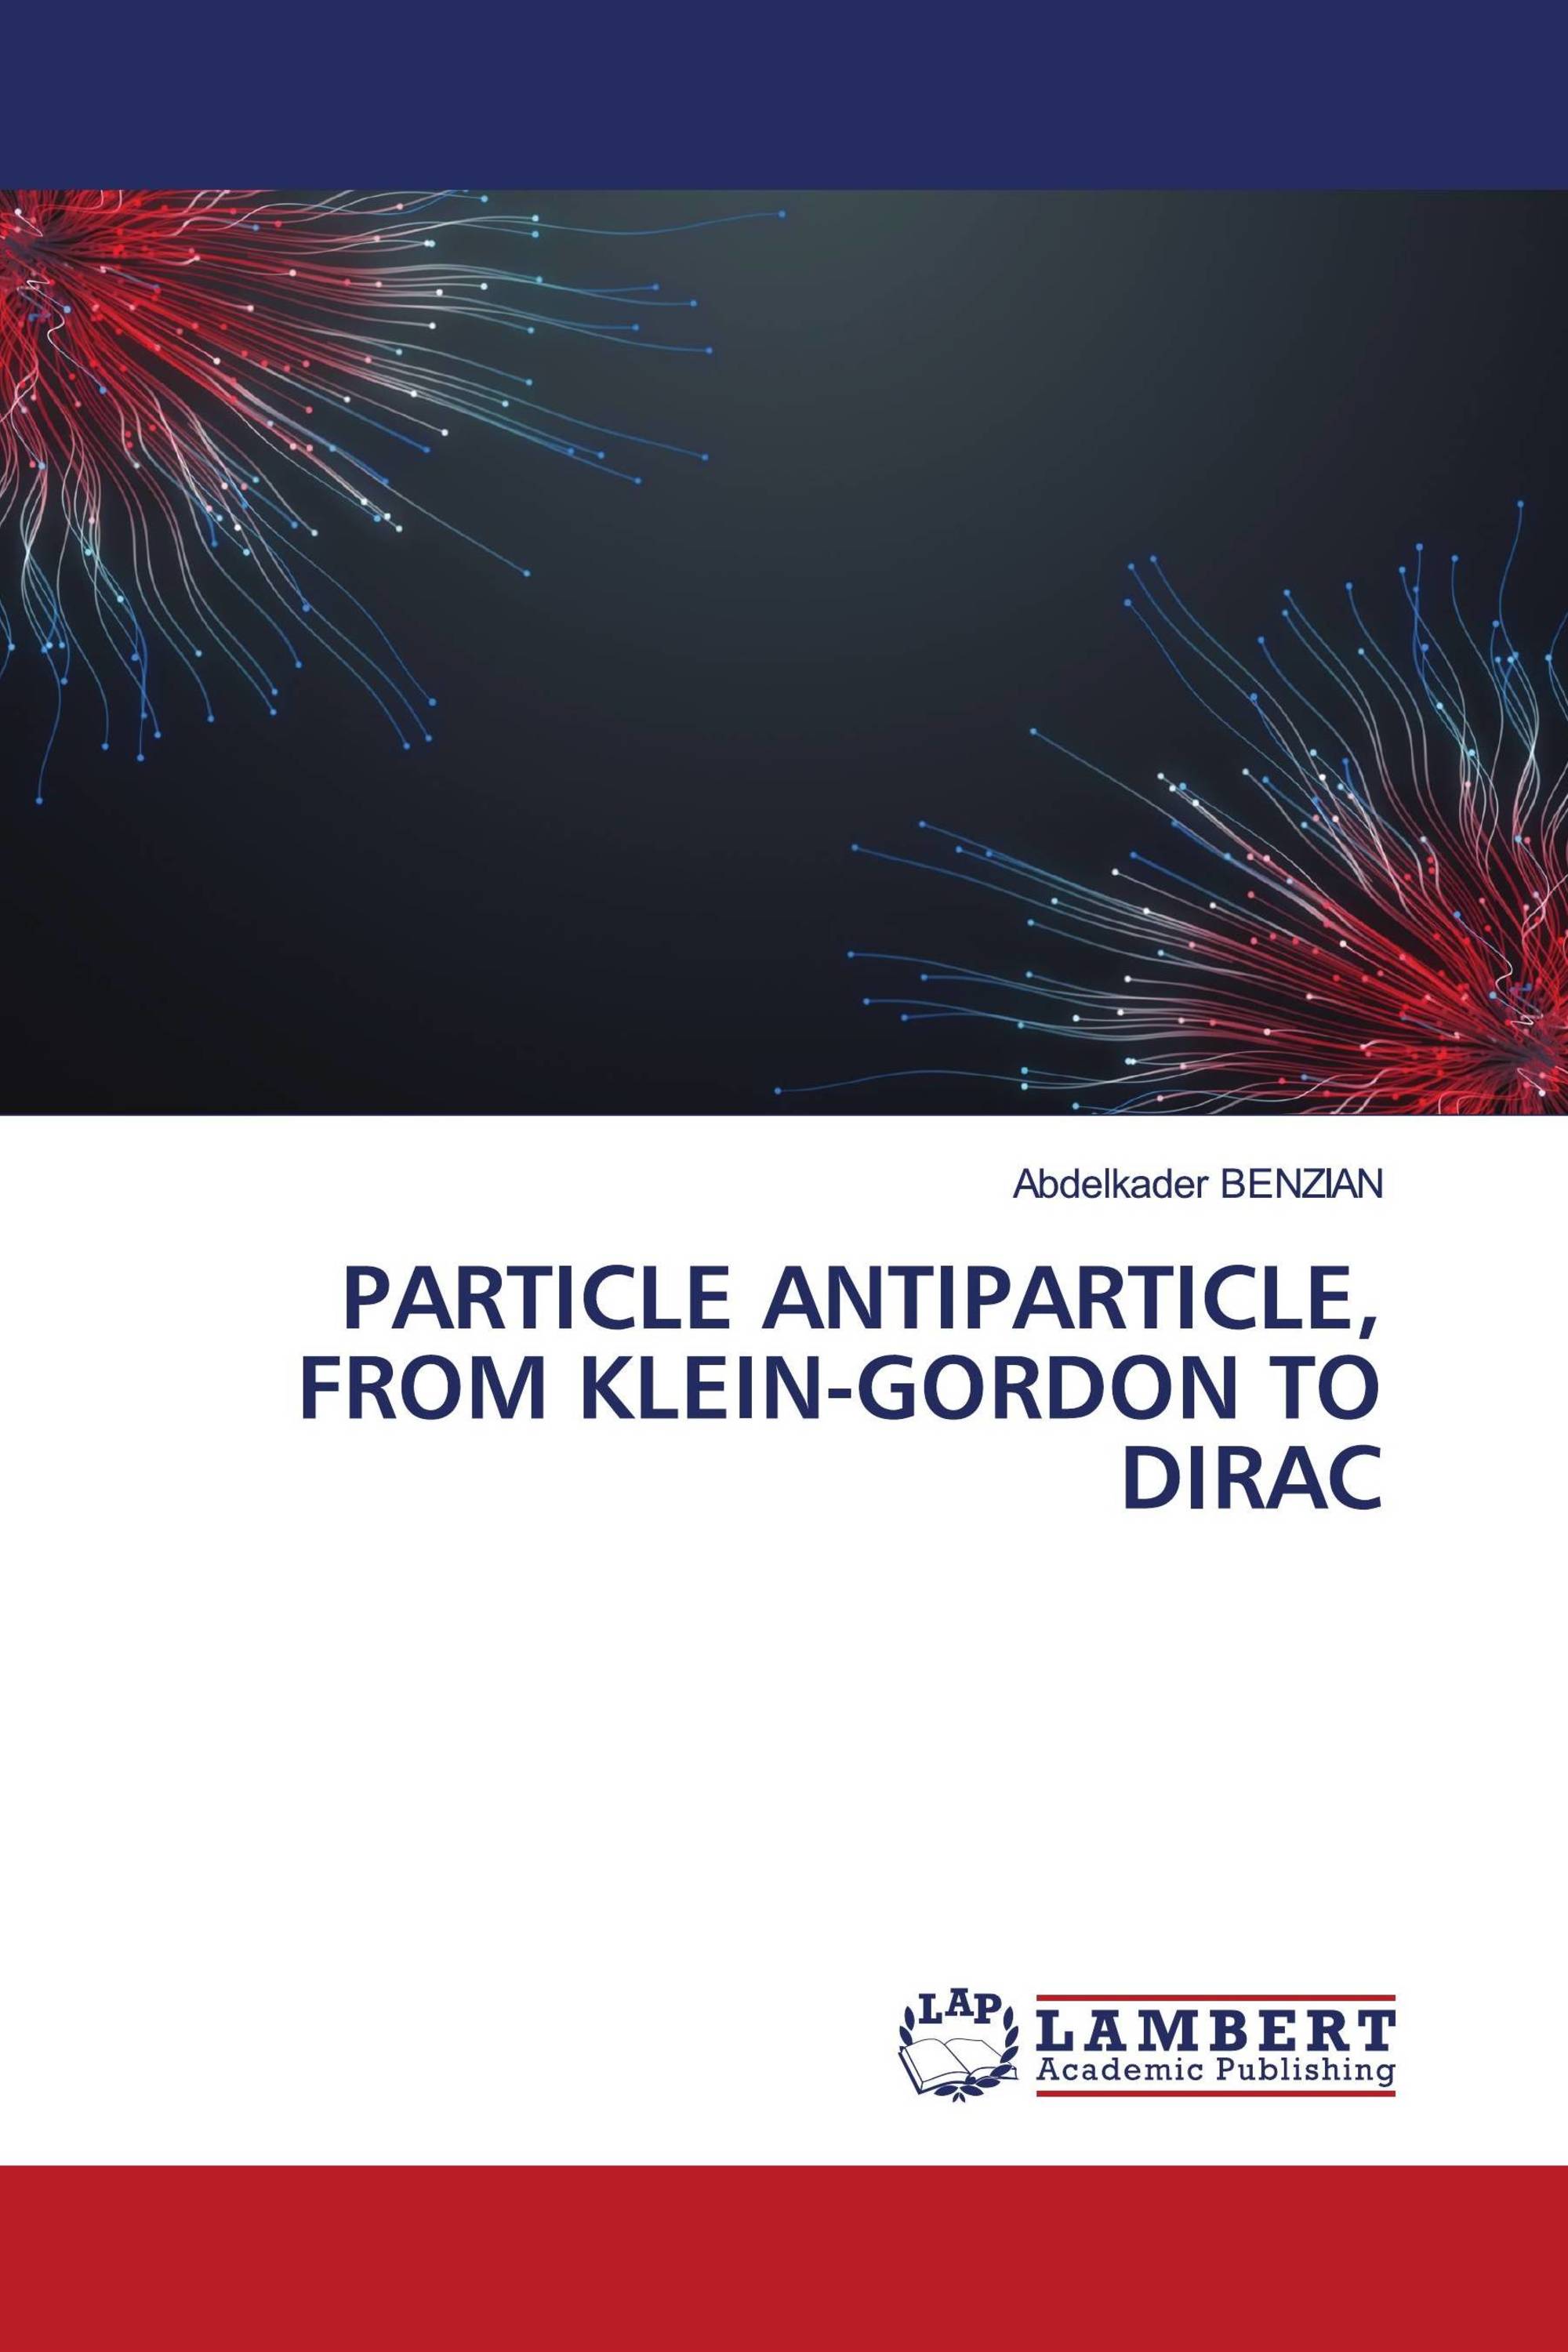 PARTICLE ANTIPARTICLE, FROM KLEIN-GORDON TO DIRAC